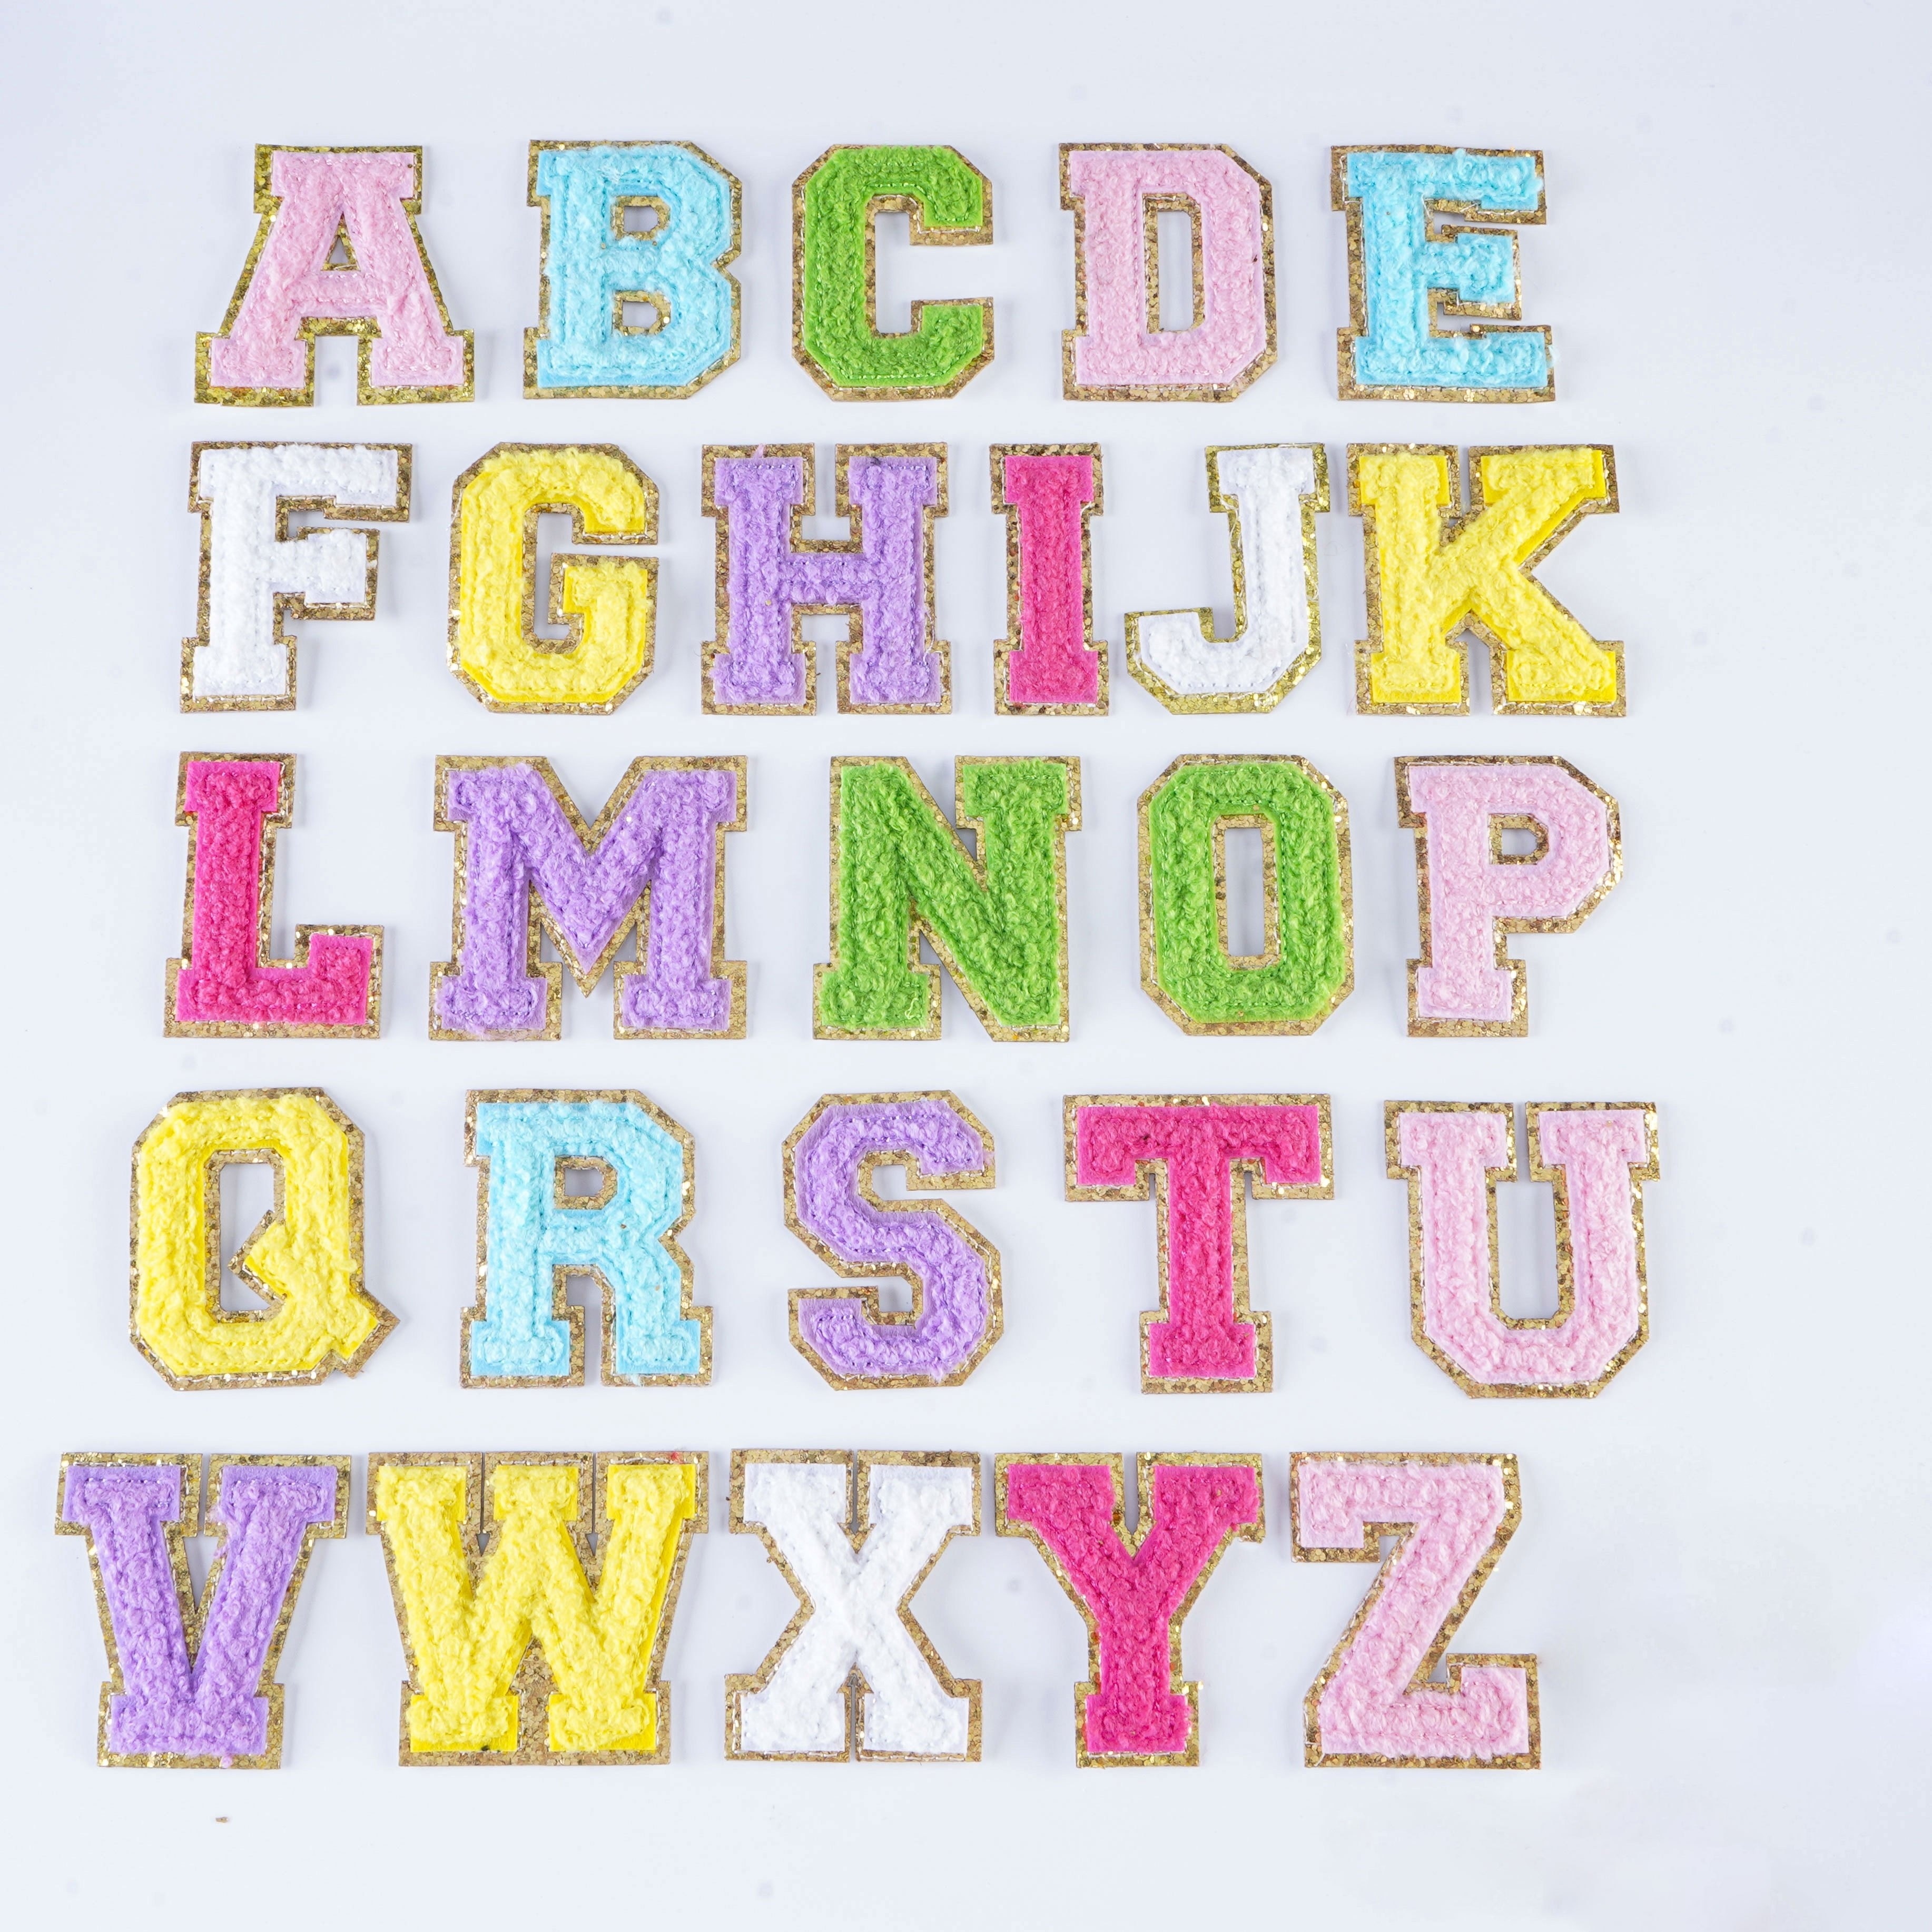 Small Letters, Modern Letters, Alphabet Stickers, Letter Stickers